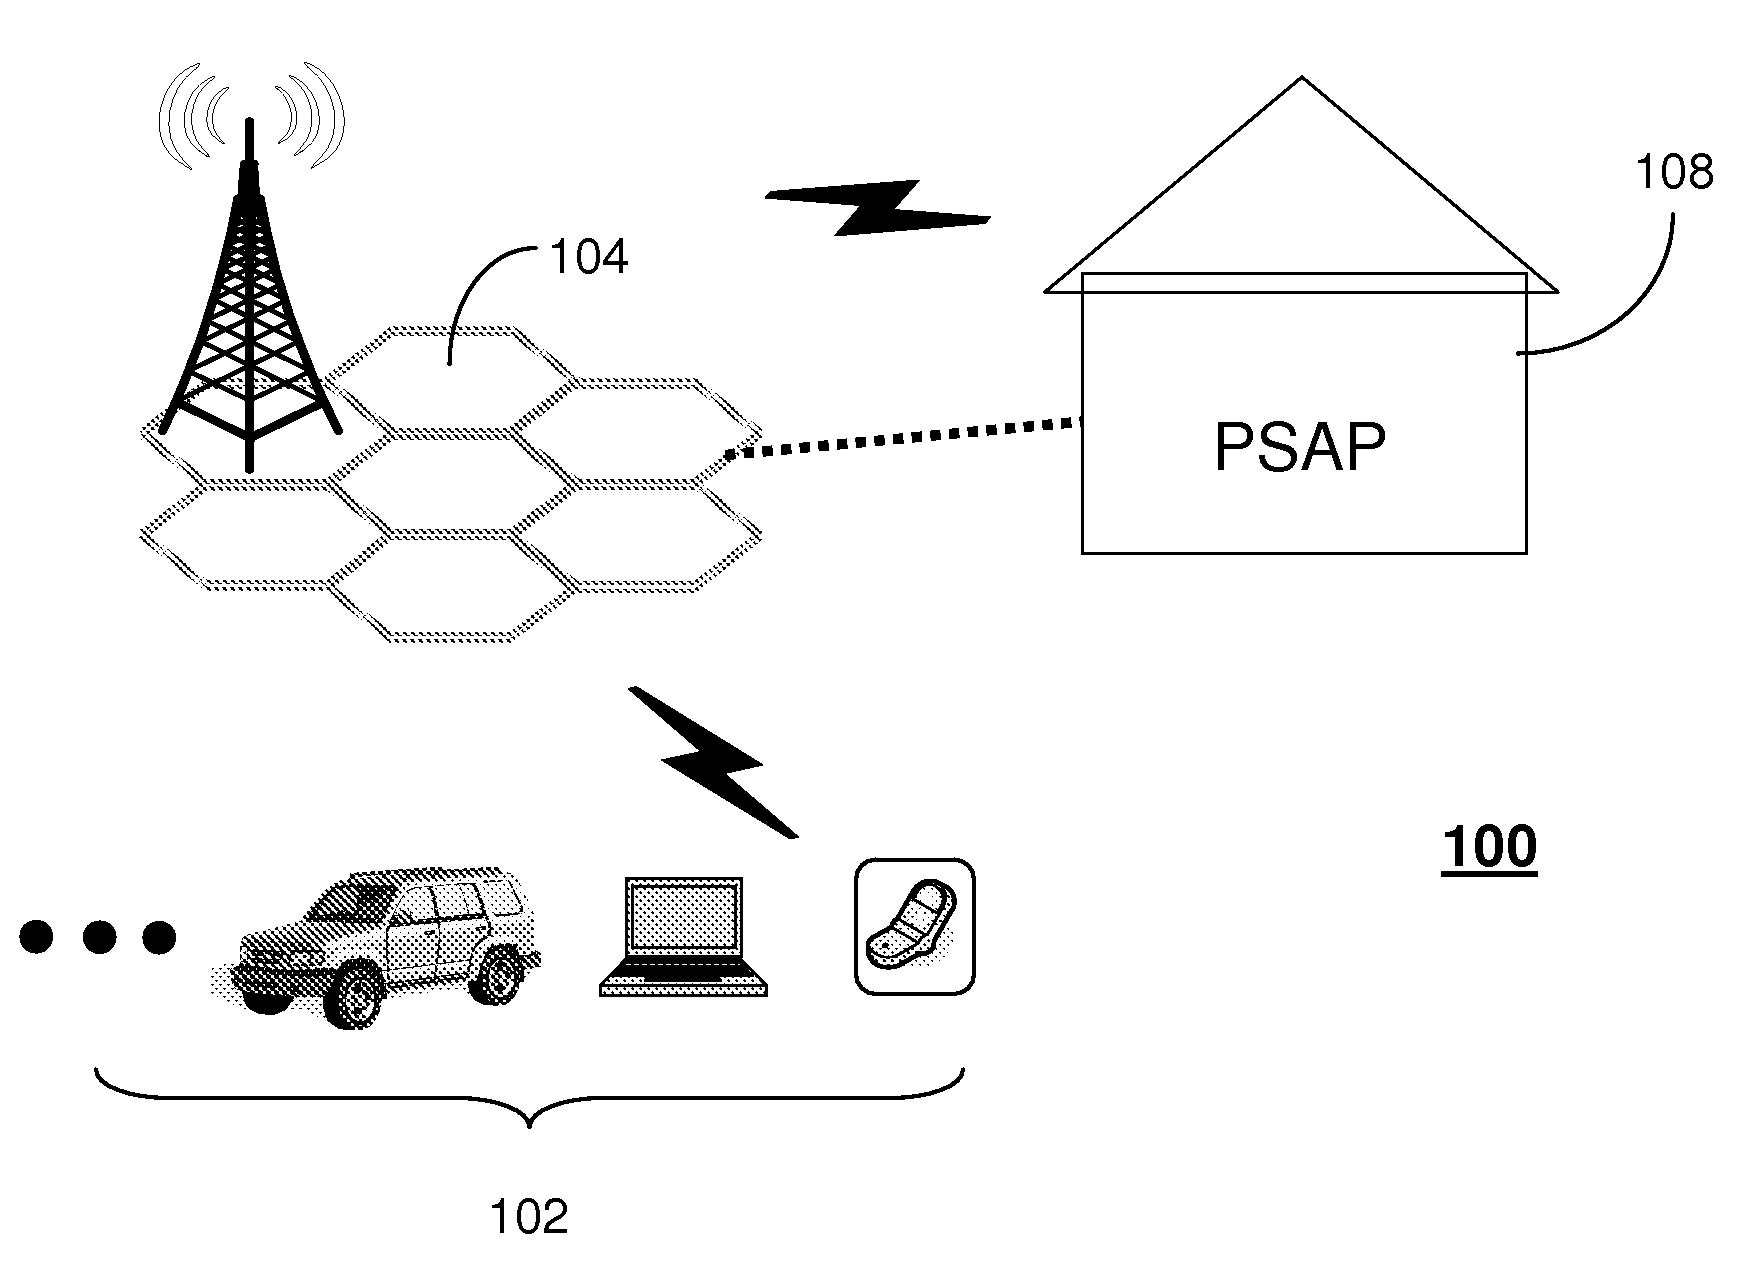 Method and apparatus for transmitting emergency alert messages